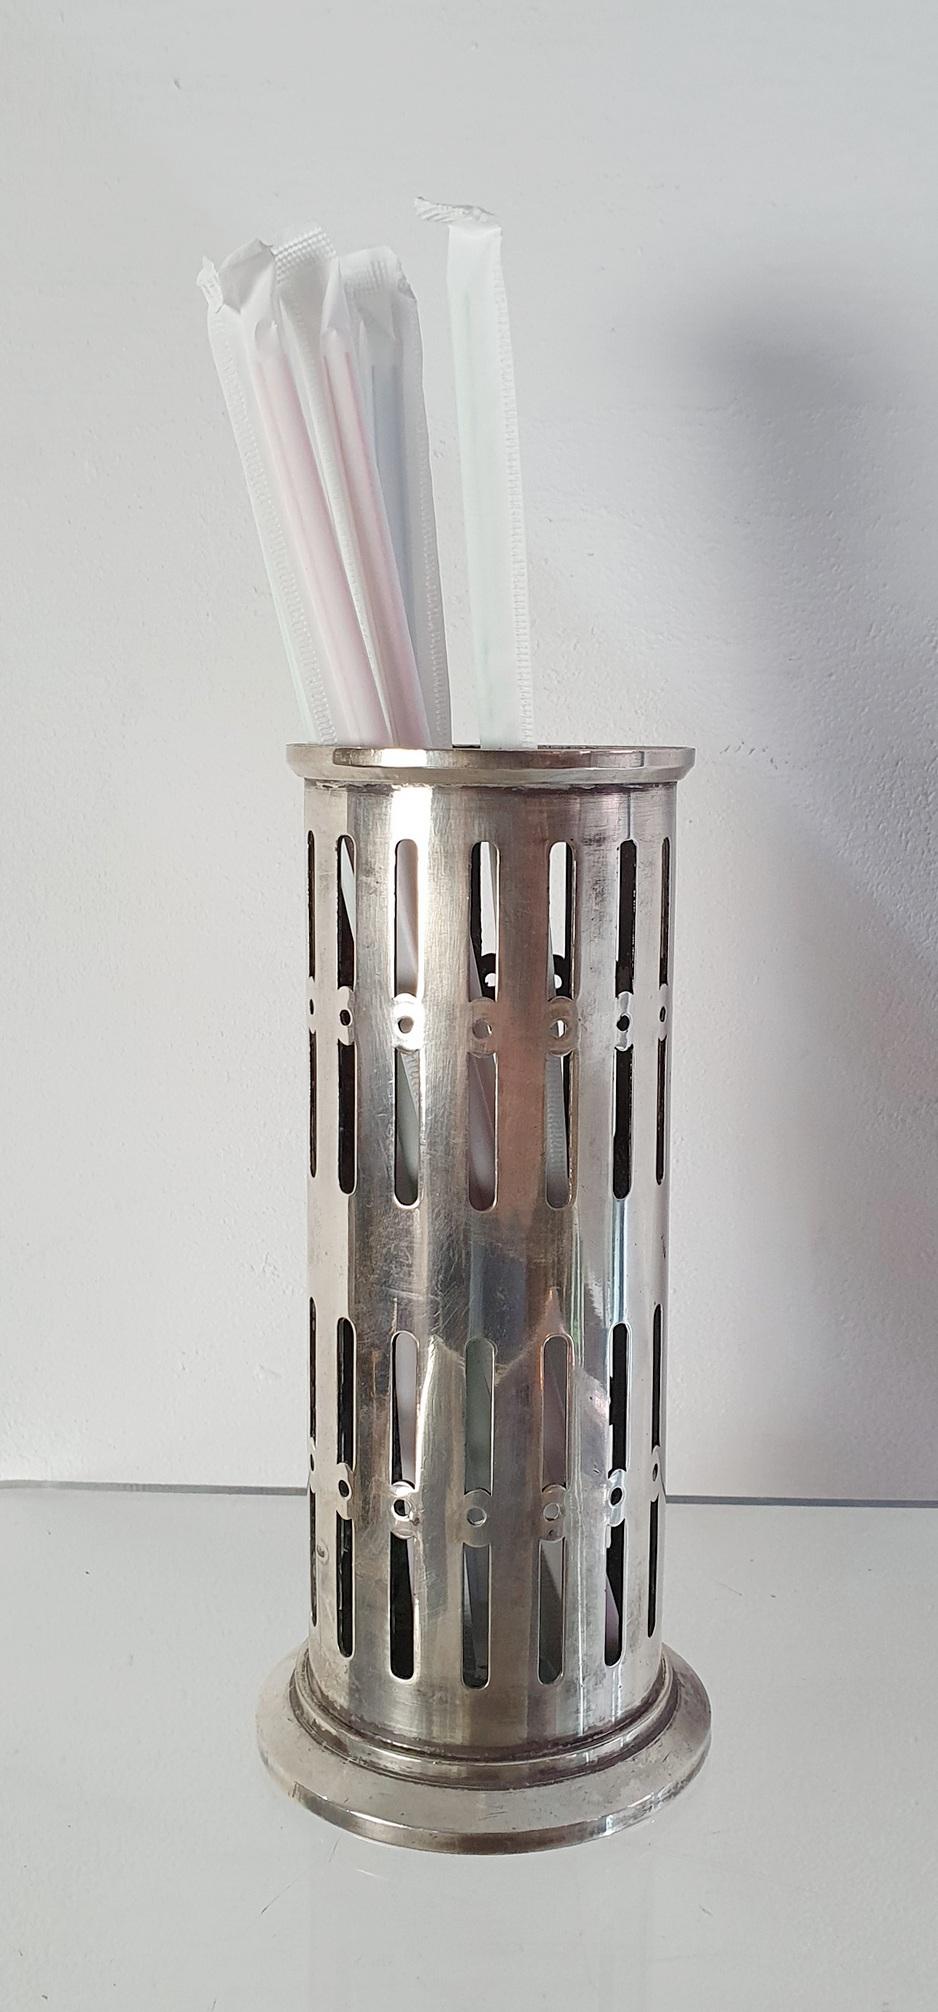 A rare art deco straw holder designed by Gio Ponti for Bar Pasticceria Alemagna at Piazza Duomo in Milano. 

The shape is simple and sleek and elegant. Signed 'Broggi Milano' for Hot. Europa as in Hotel Europa on the bottom. In good condition